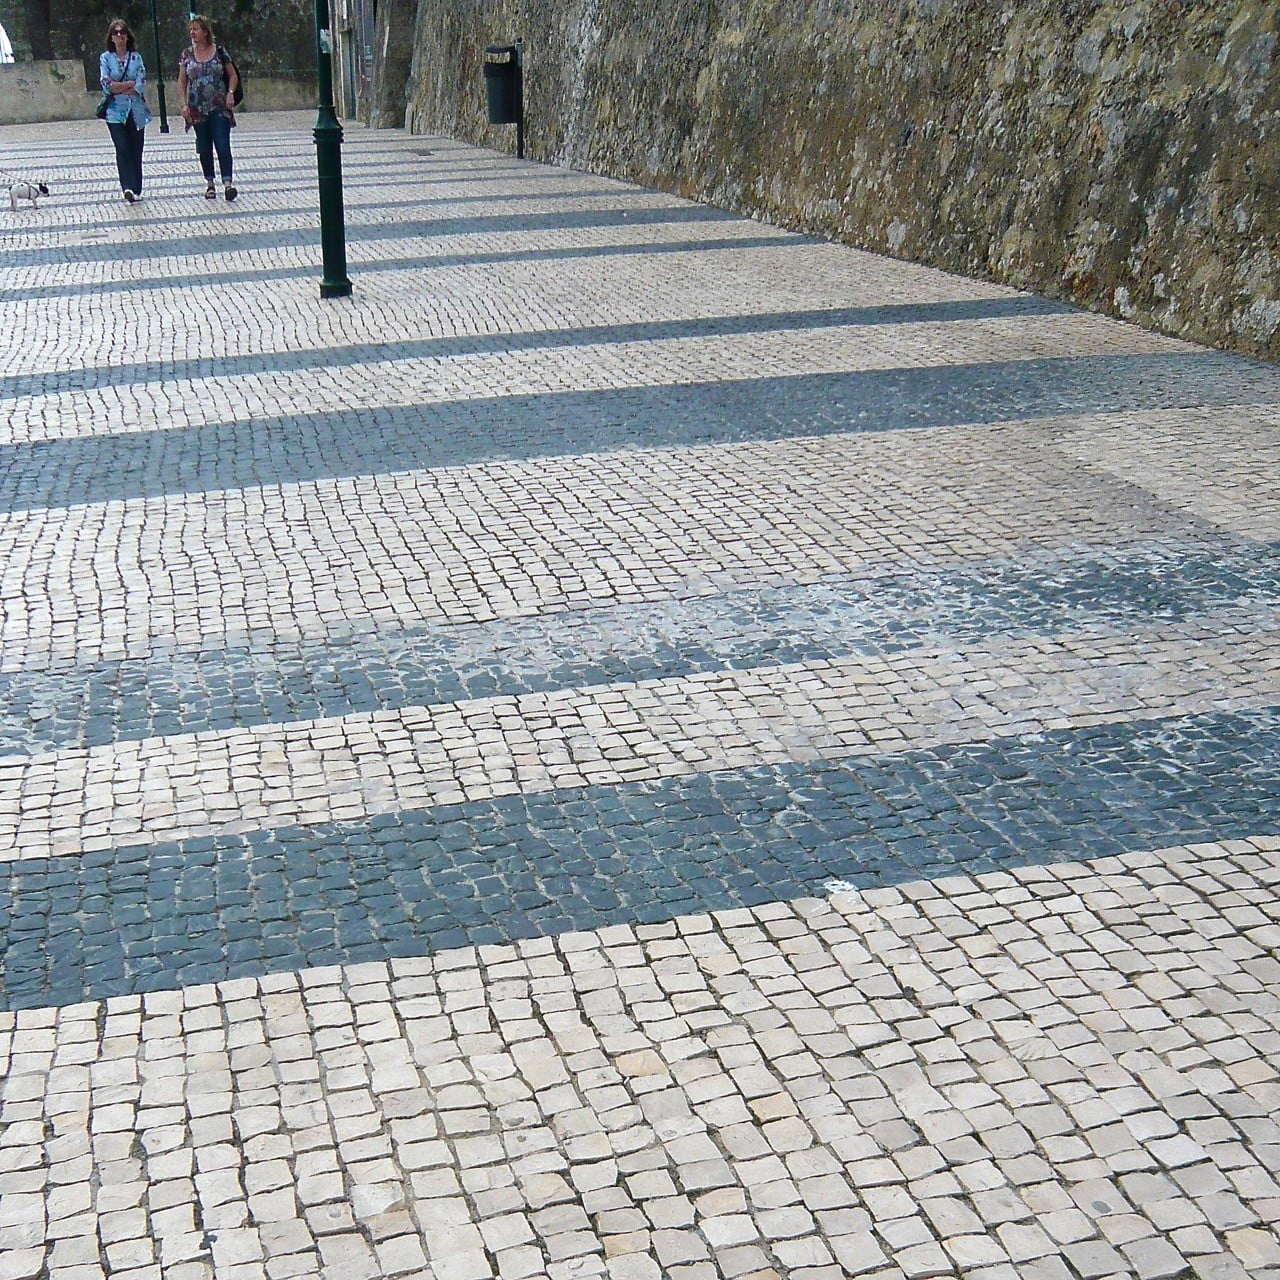 I love this paving we saw everywhere in Portugal - so stylish & decorative. Far better than nasty tarmac!